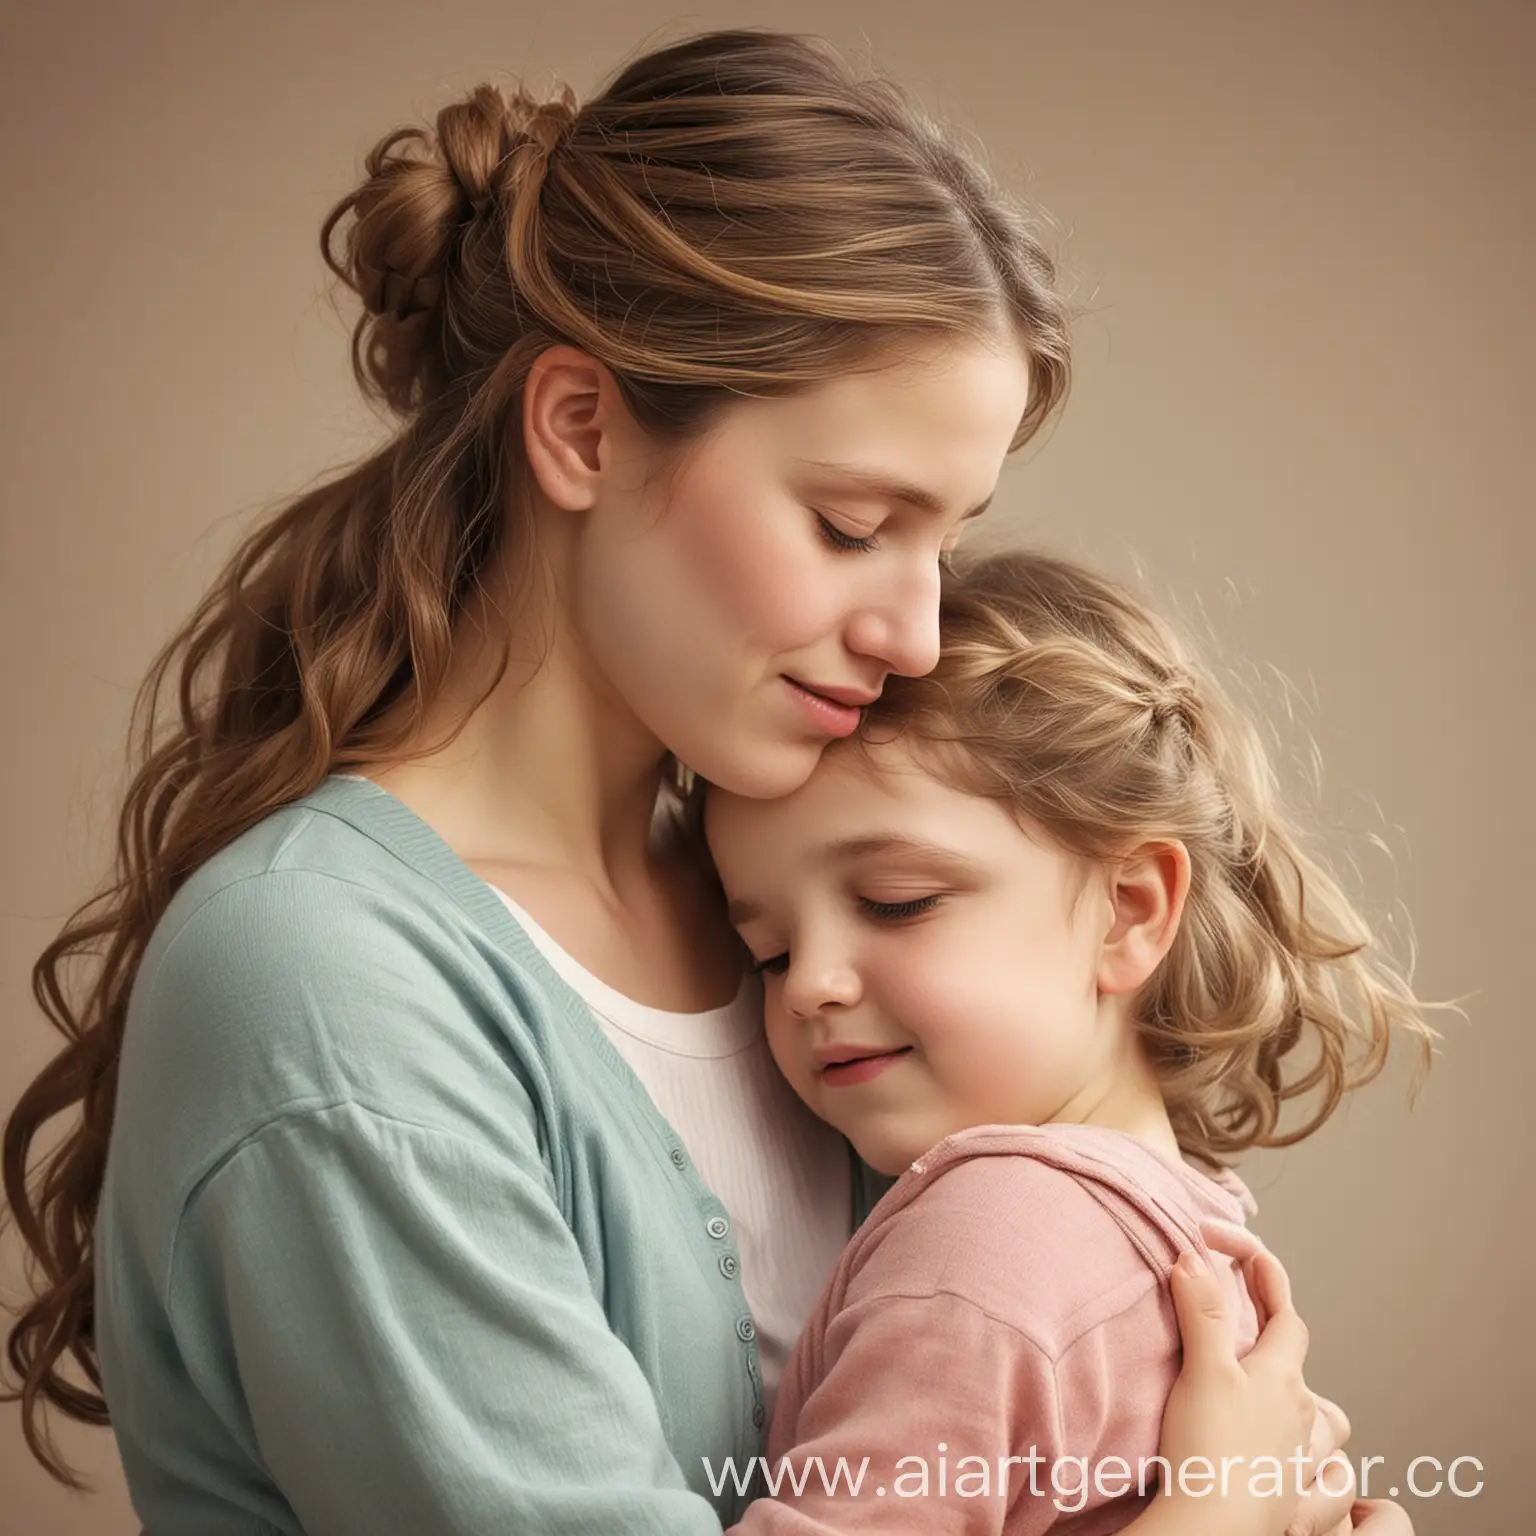 Embracing-Change-Mother-and-Child-Bonding-in-Supportive-Illustration